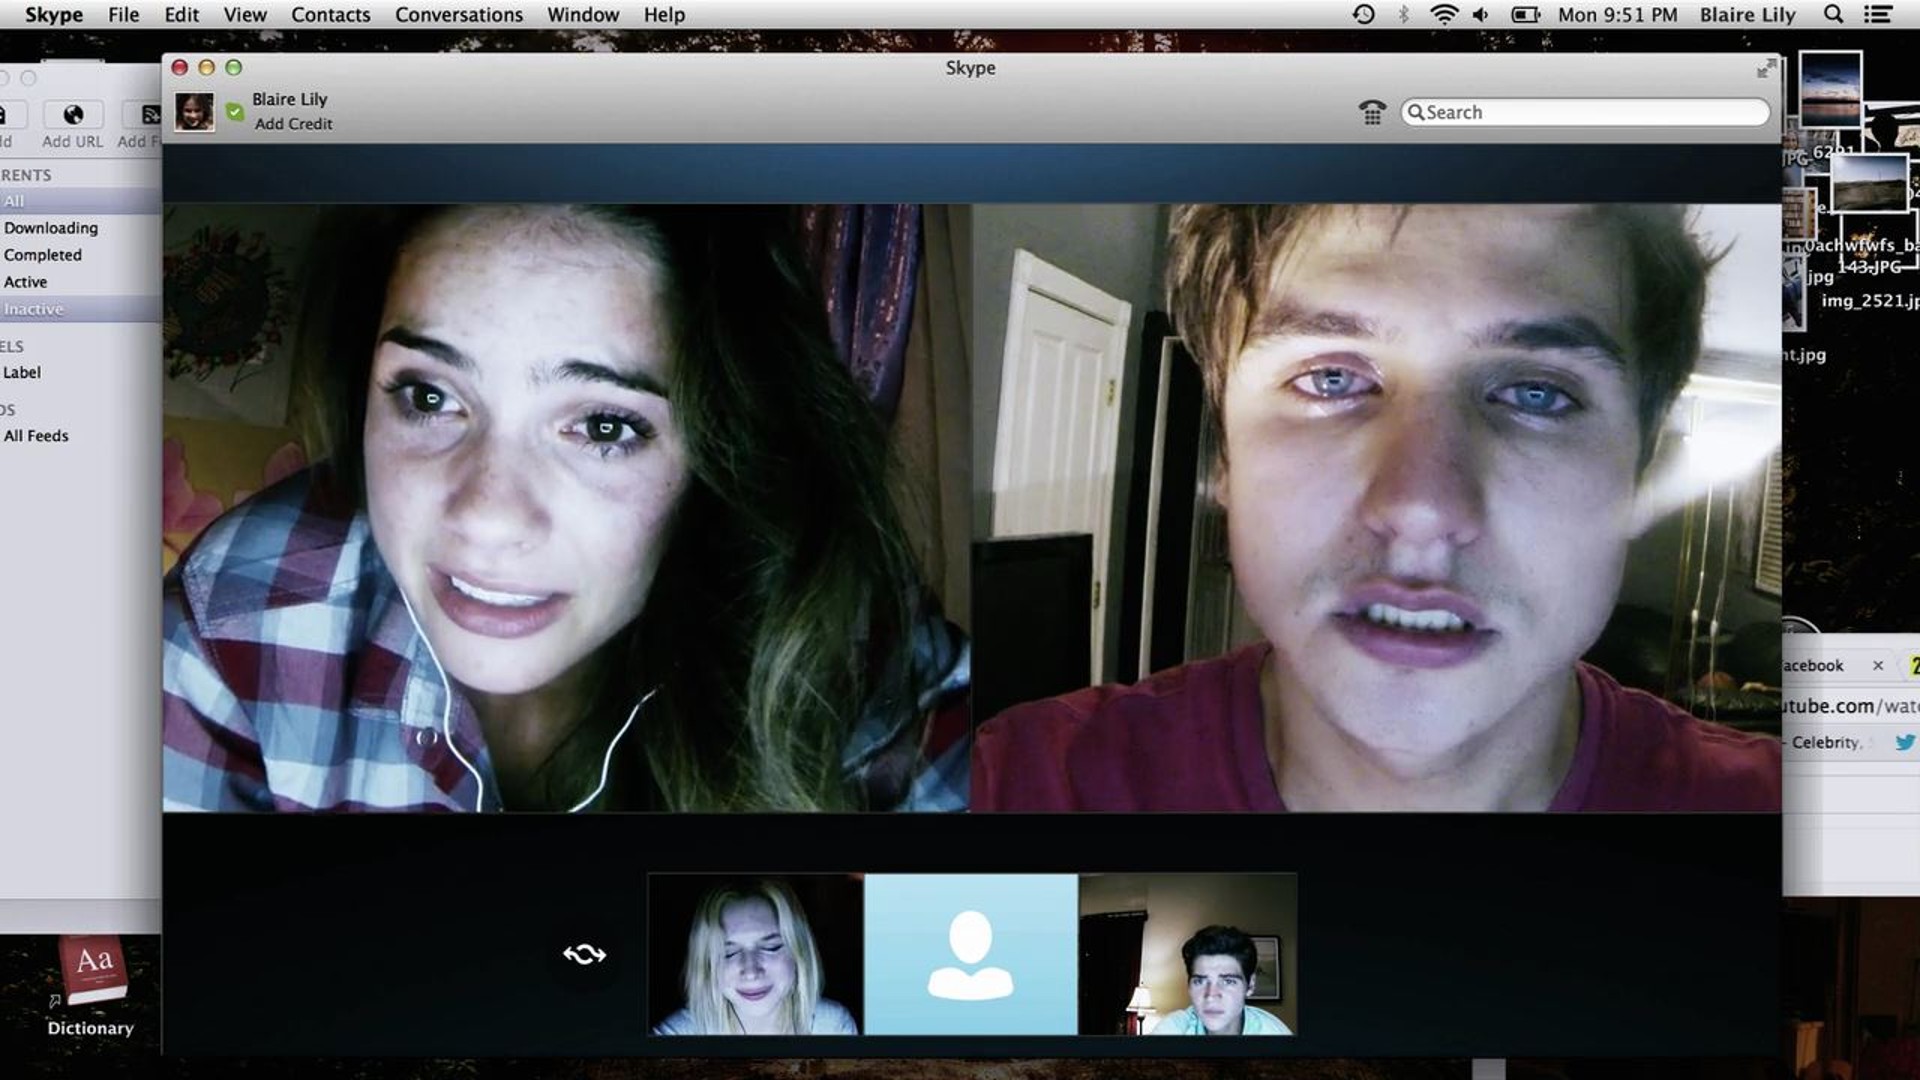 Timur Teen Sex Force Video - Unfriended is the quintessential movie about the internet | Digital Trends